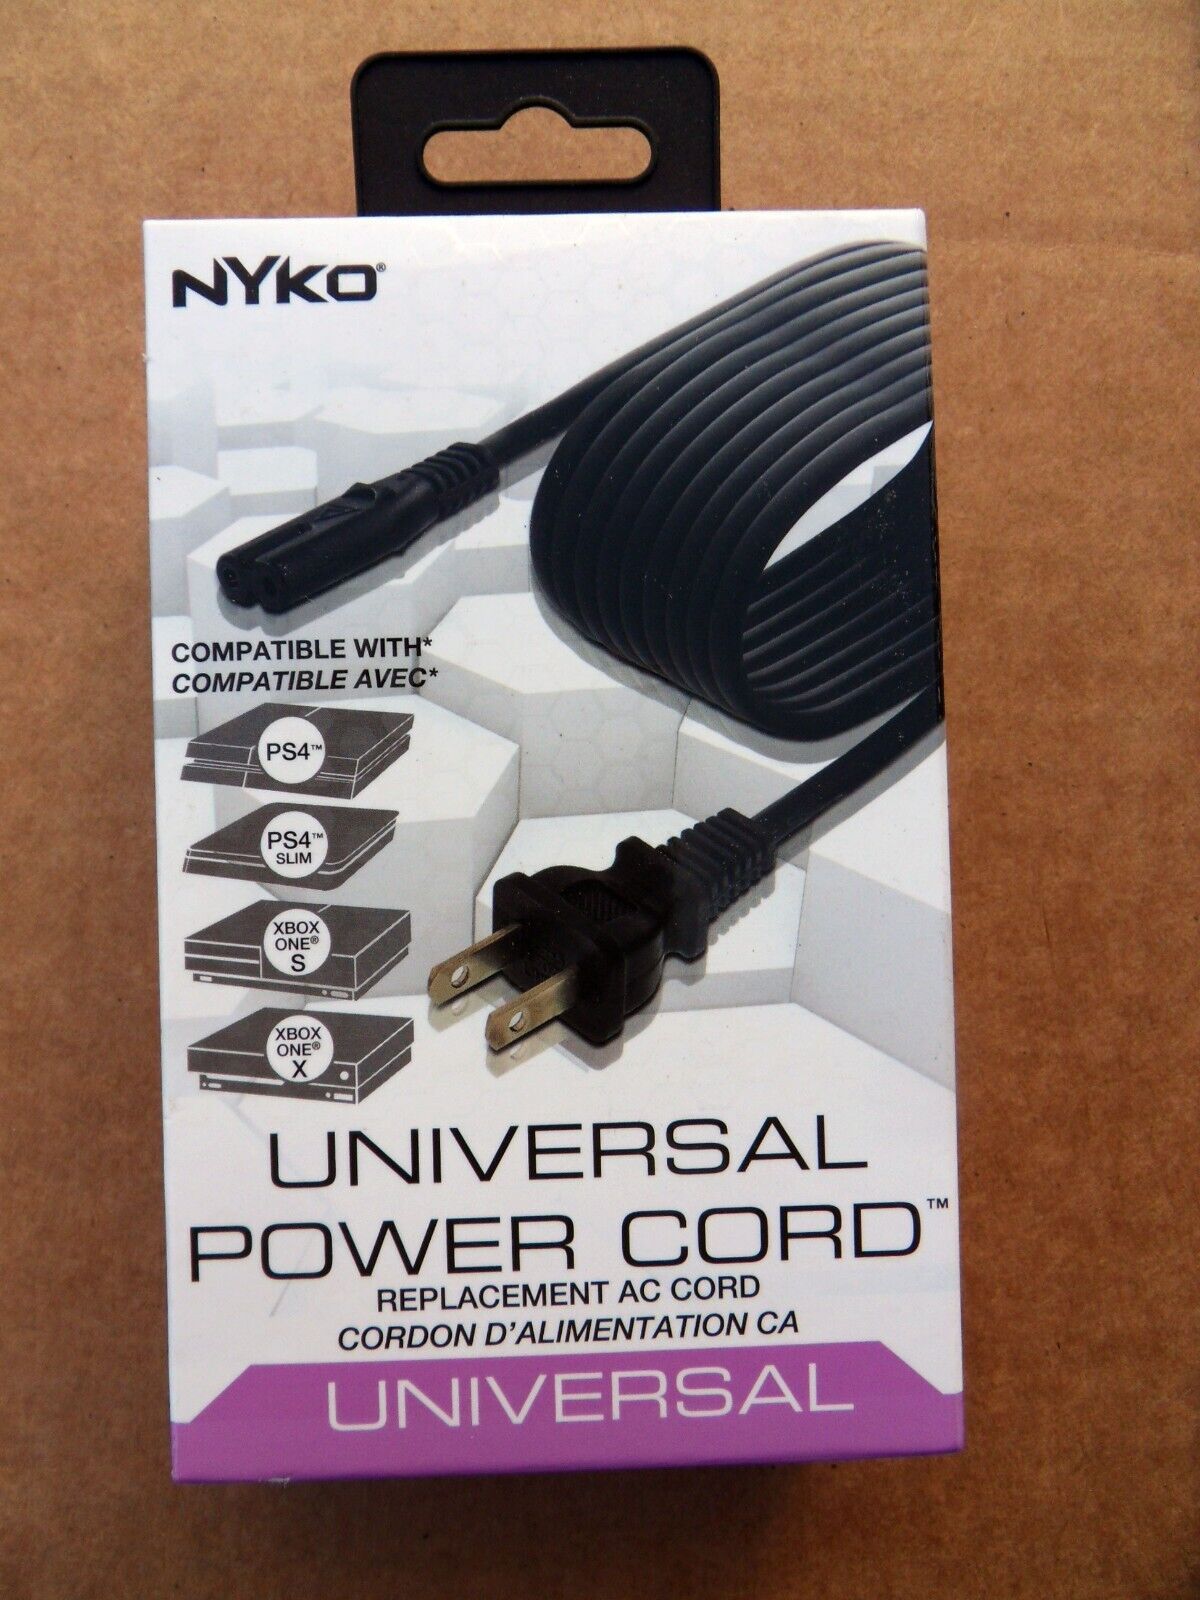 NYKO Universal Replacement Power Cord for PS4, PS4Slim, XBOX One S &X 